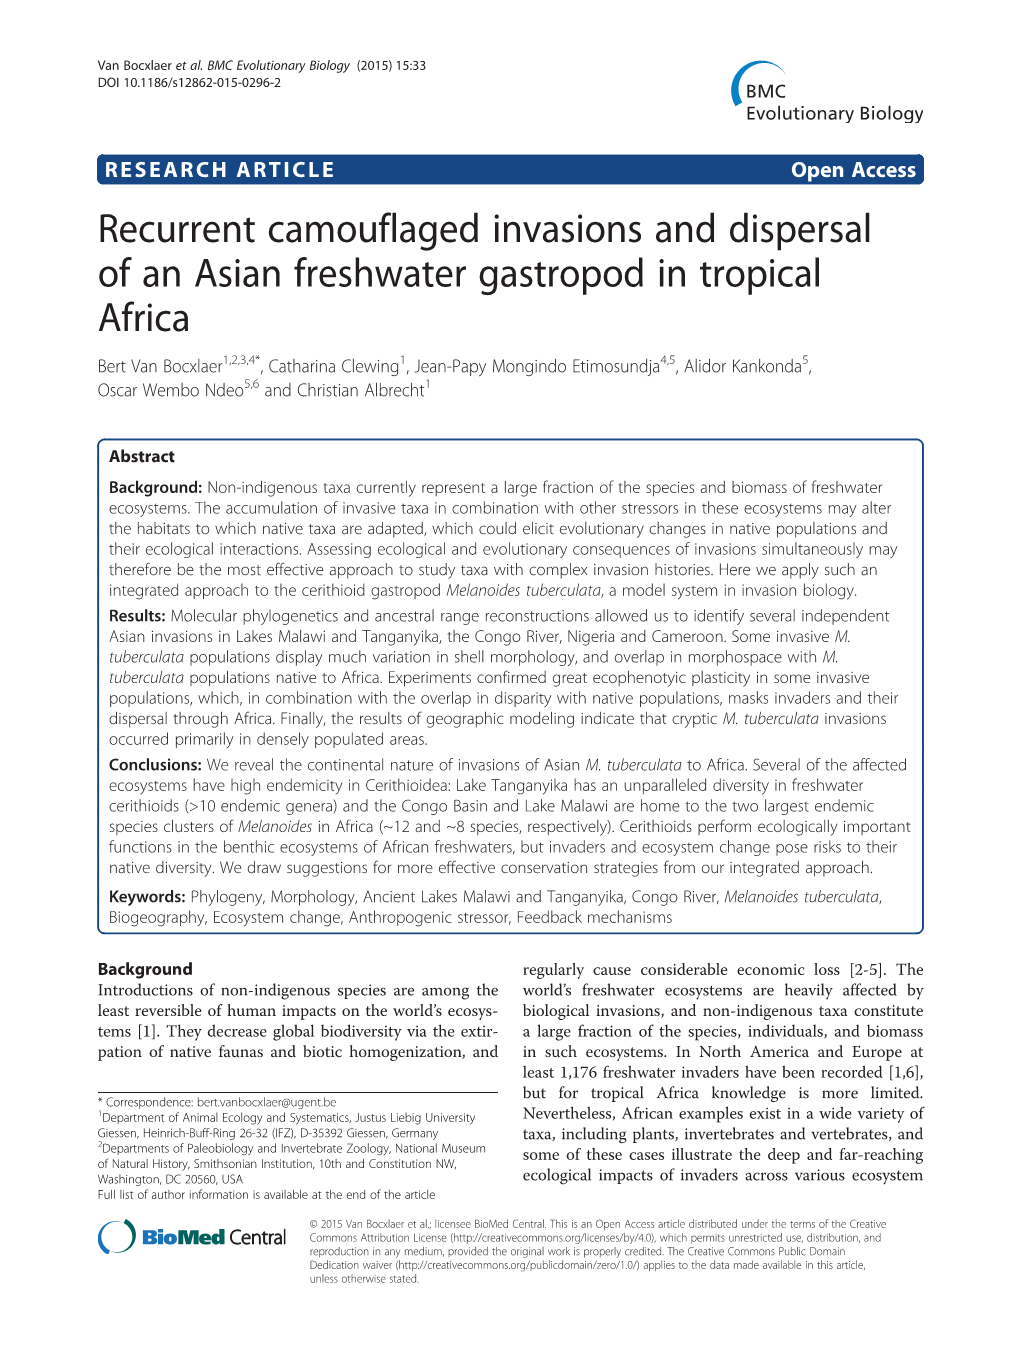 Recurrent Camouflaged Invasions and Dispersal of an Asian Freshwater